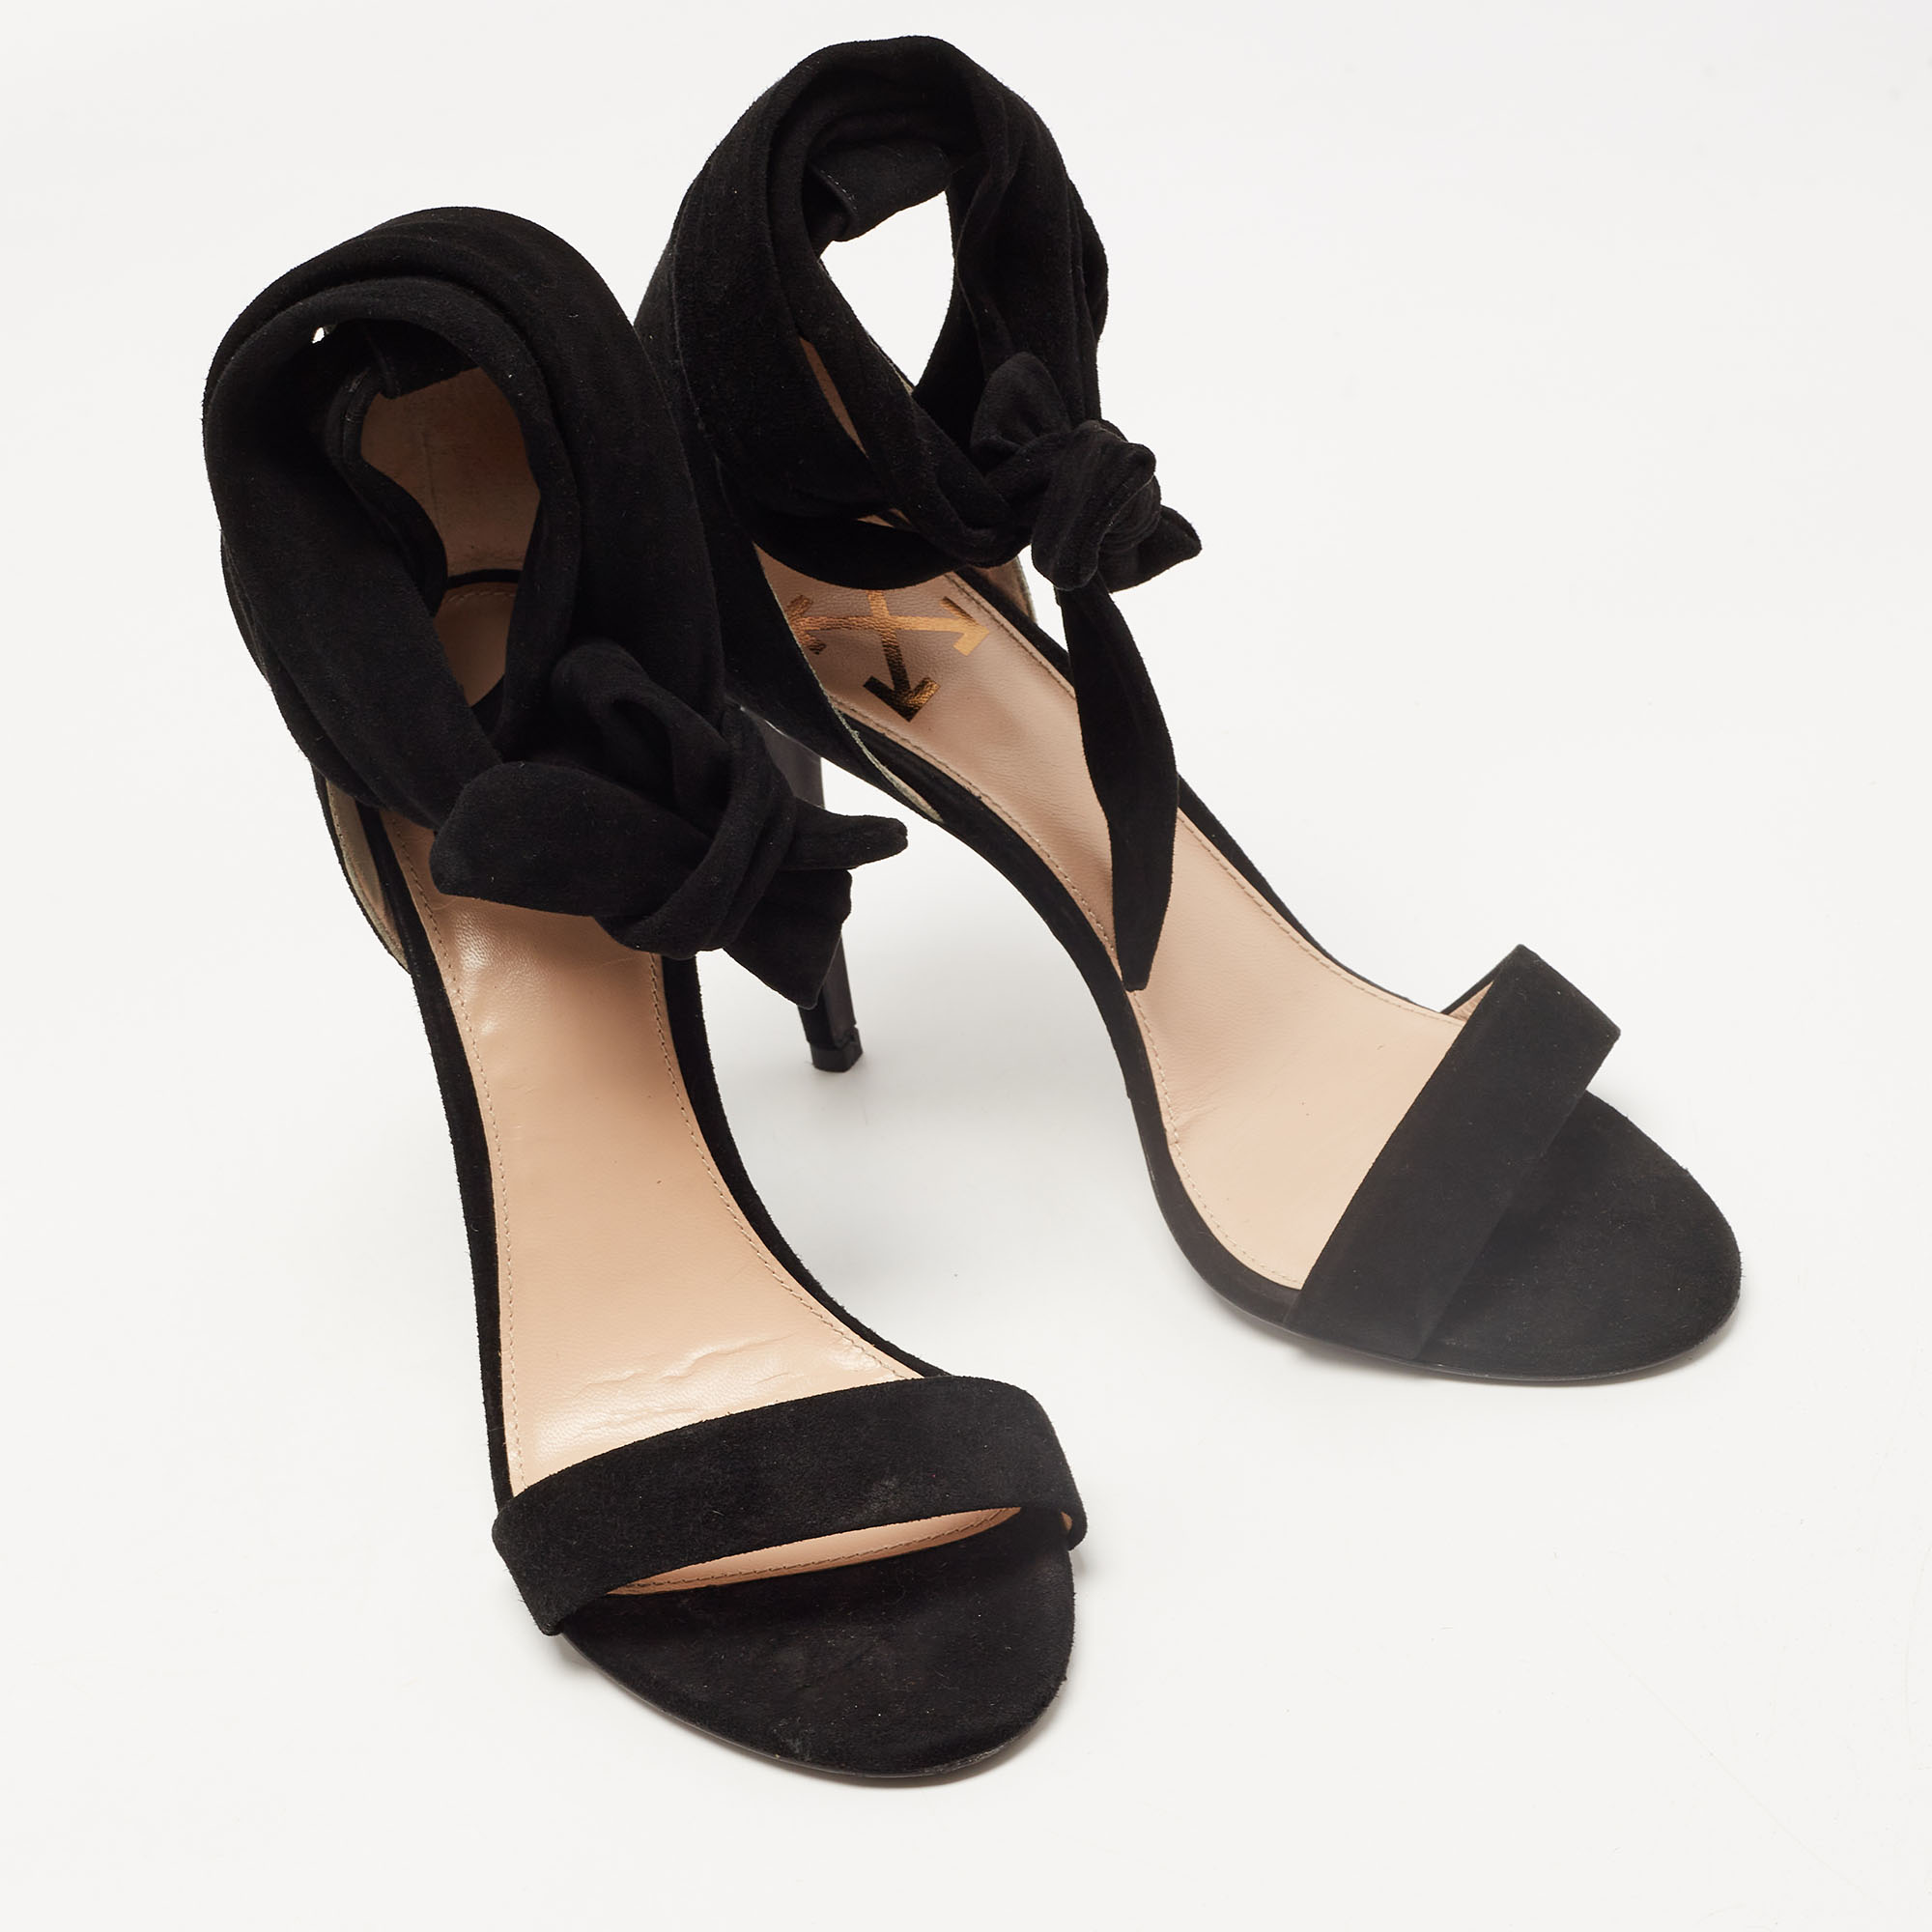 Off-White Black Suede Ankle Wrap Sandals Size 39